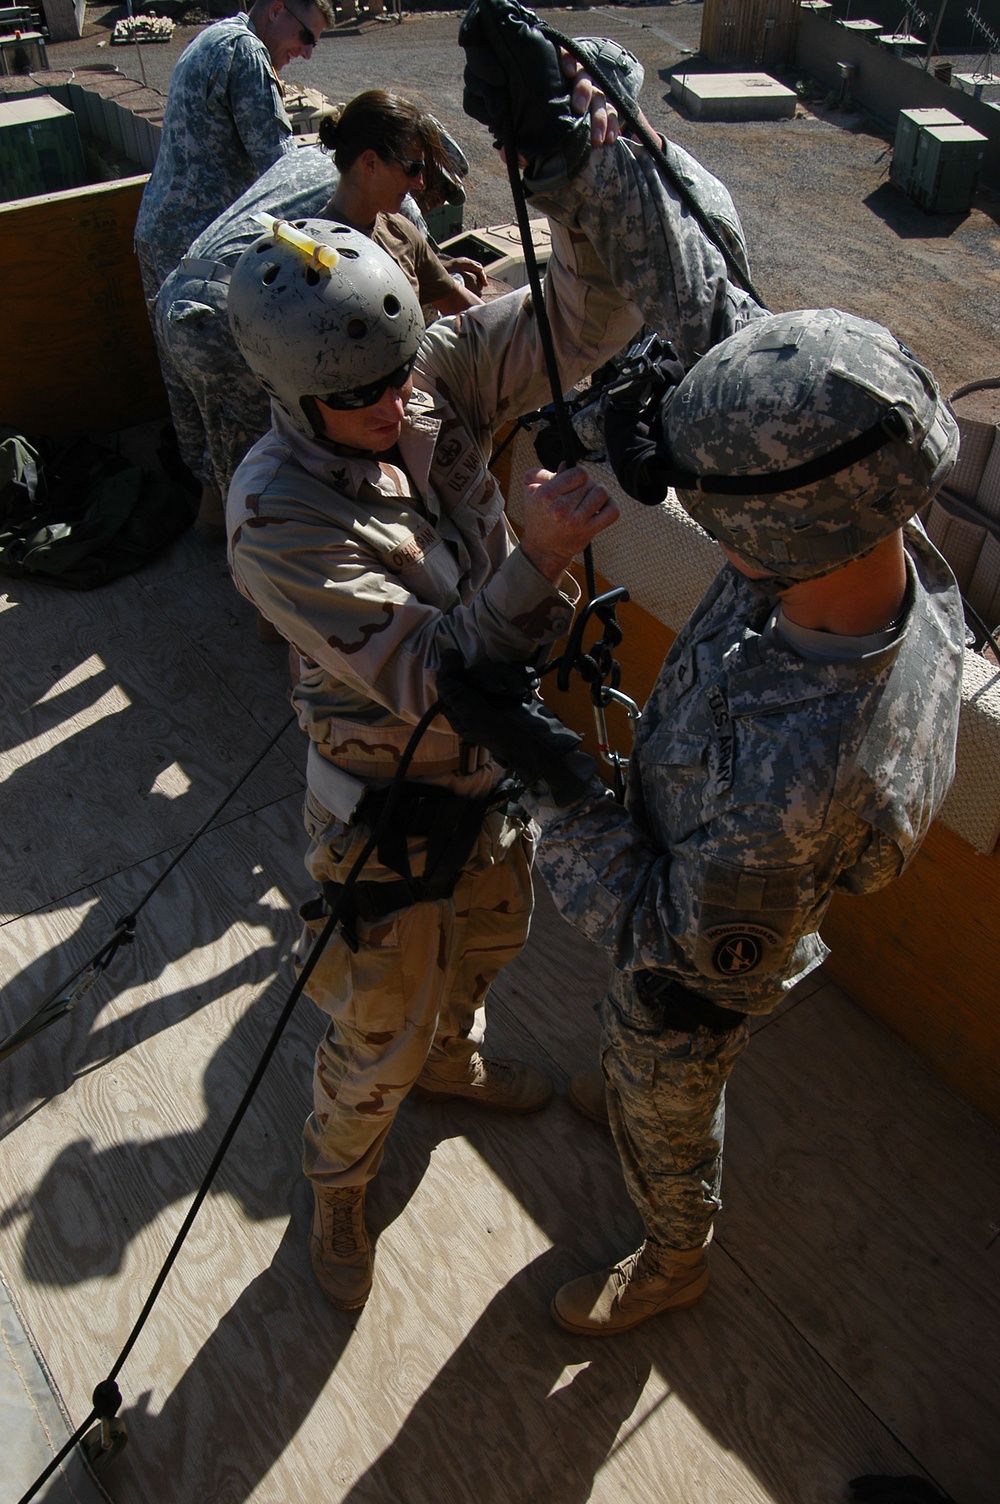 DVIDS - News - Soldiers learn to rappel to enhance capabilities